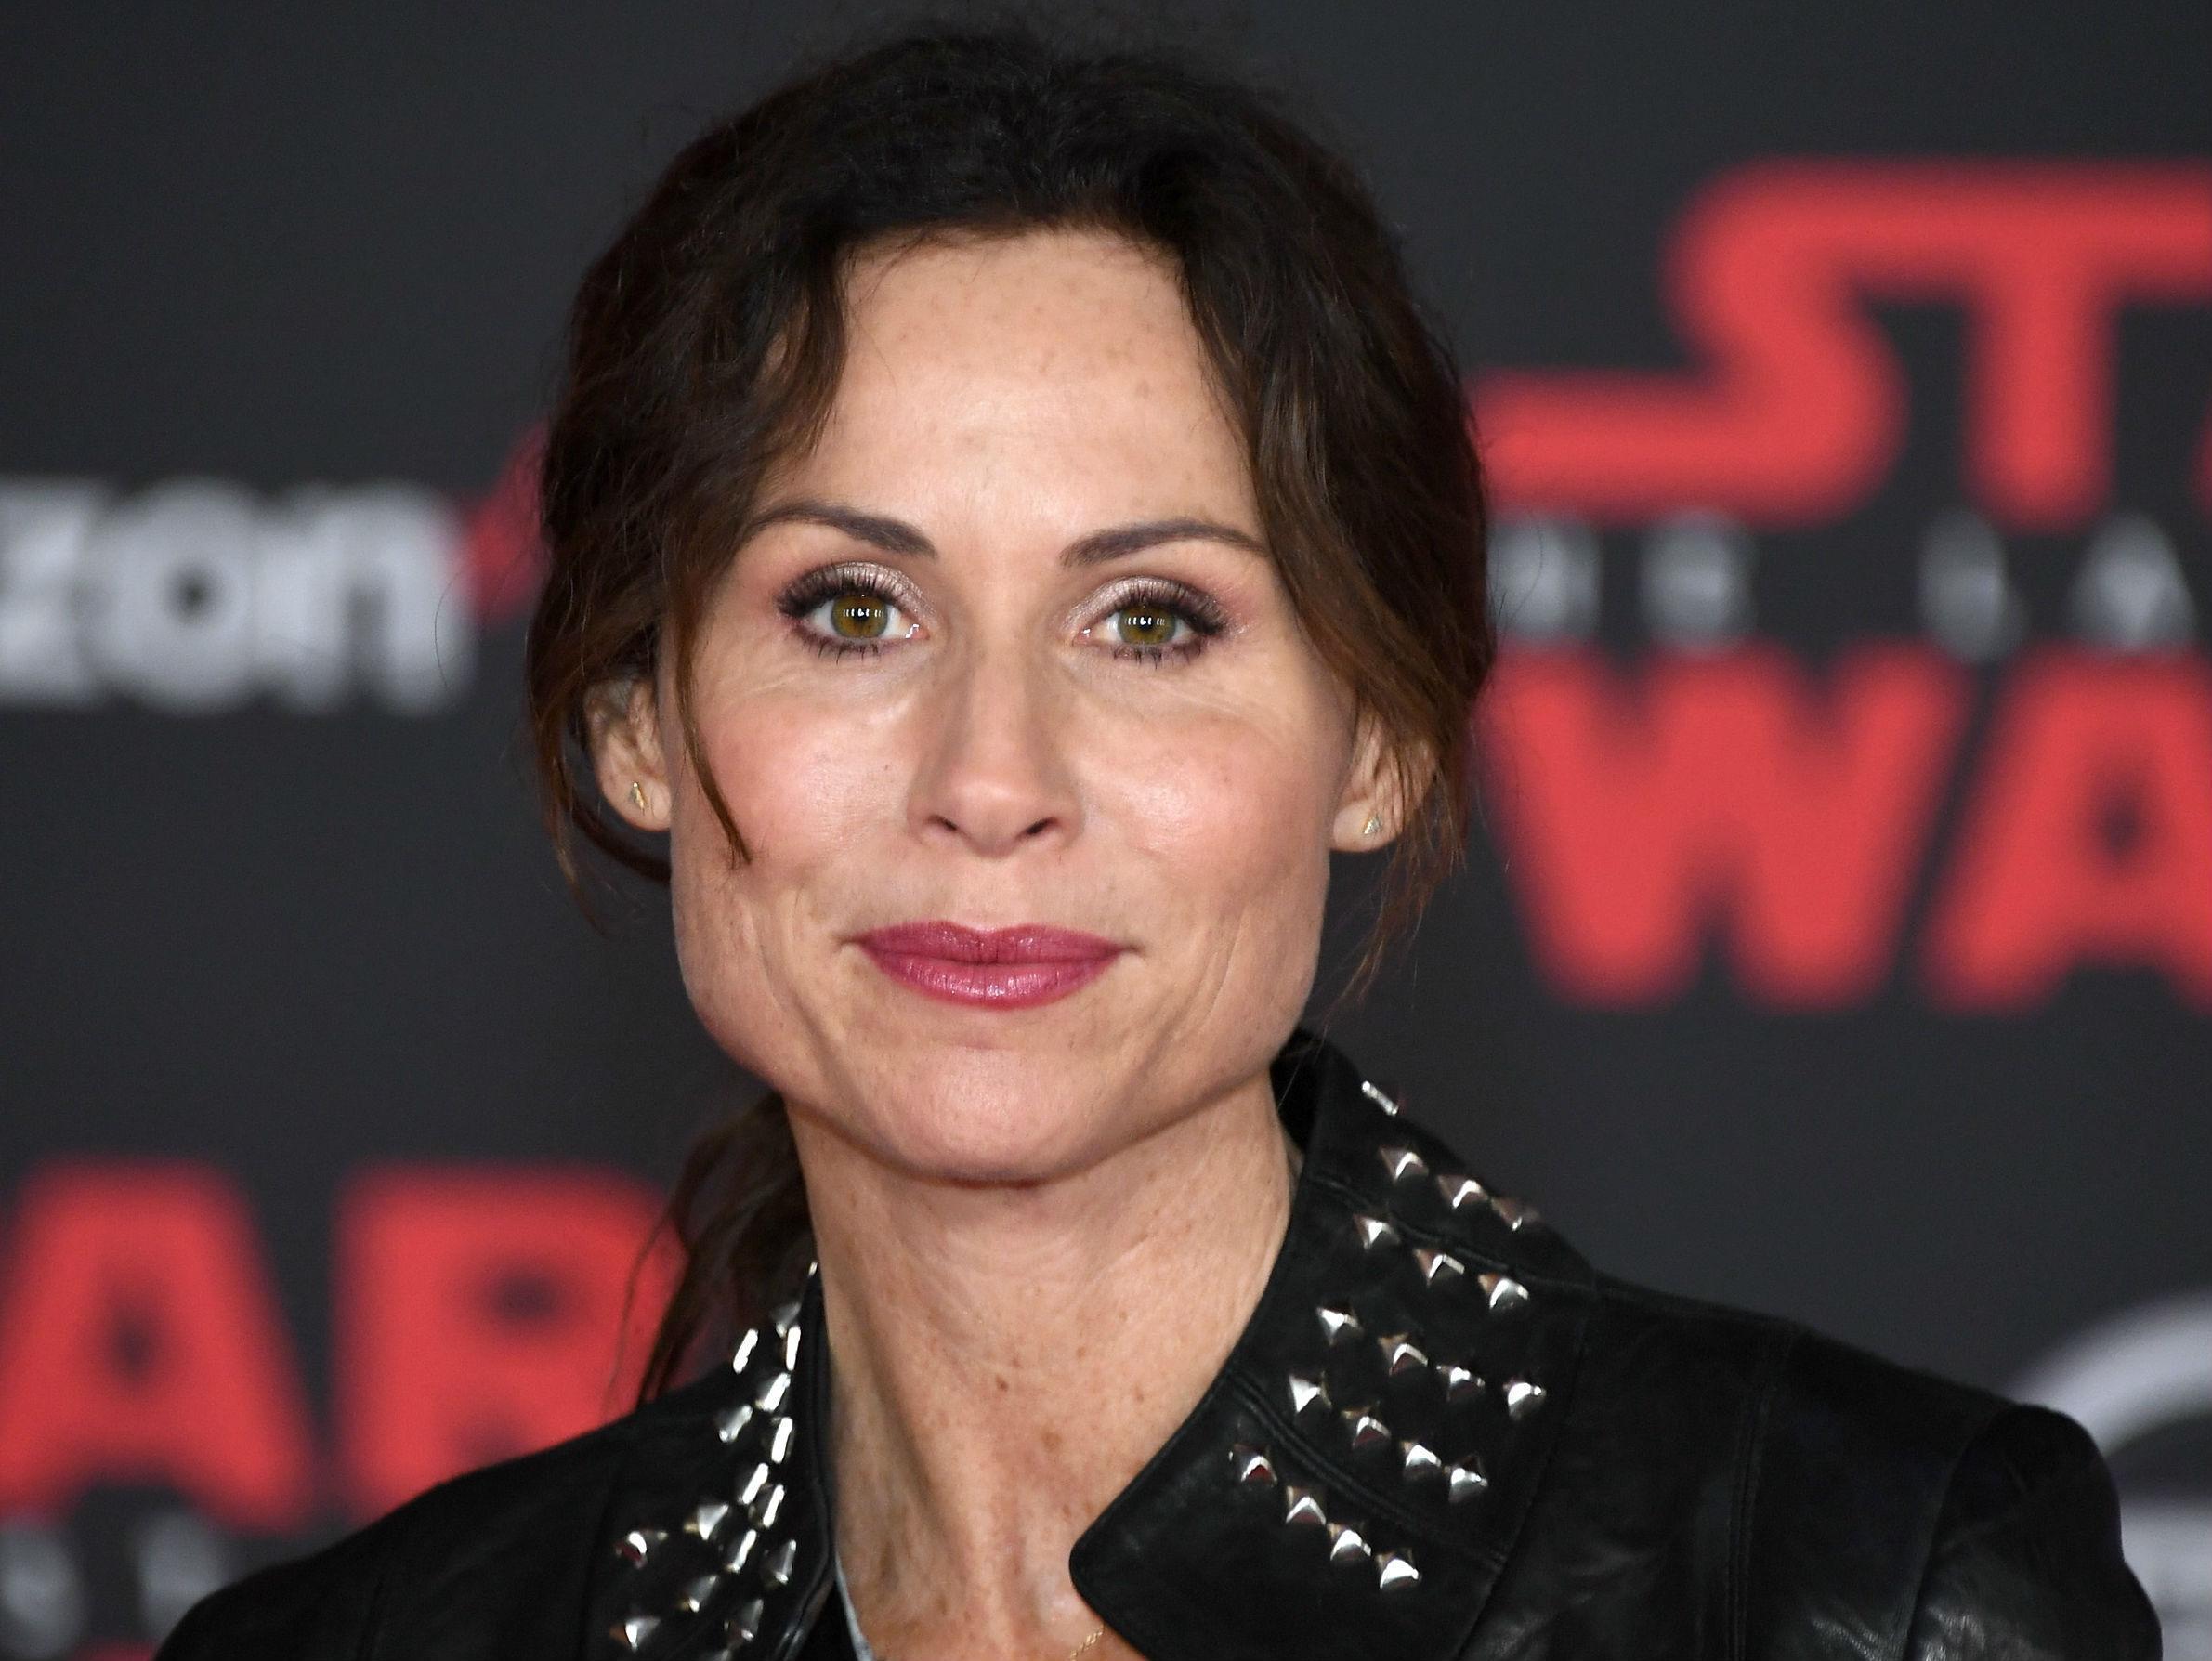 Minnie Driver was ‘devastated’ by the Oxfam revelations